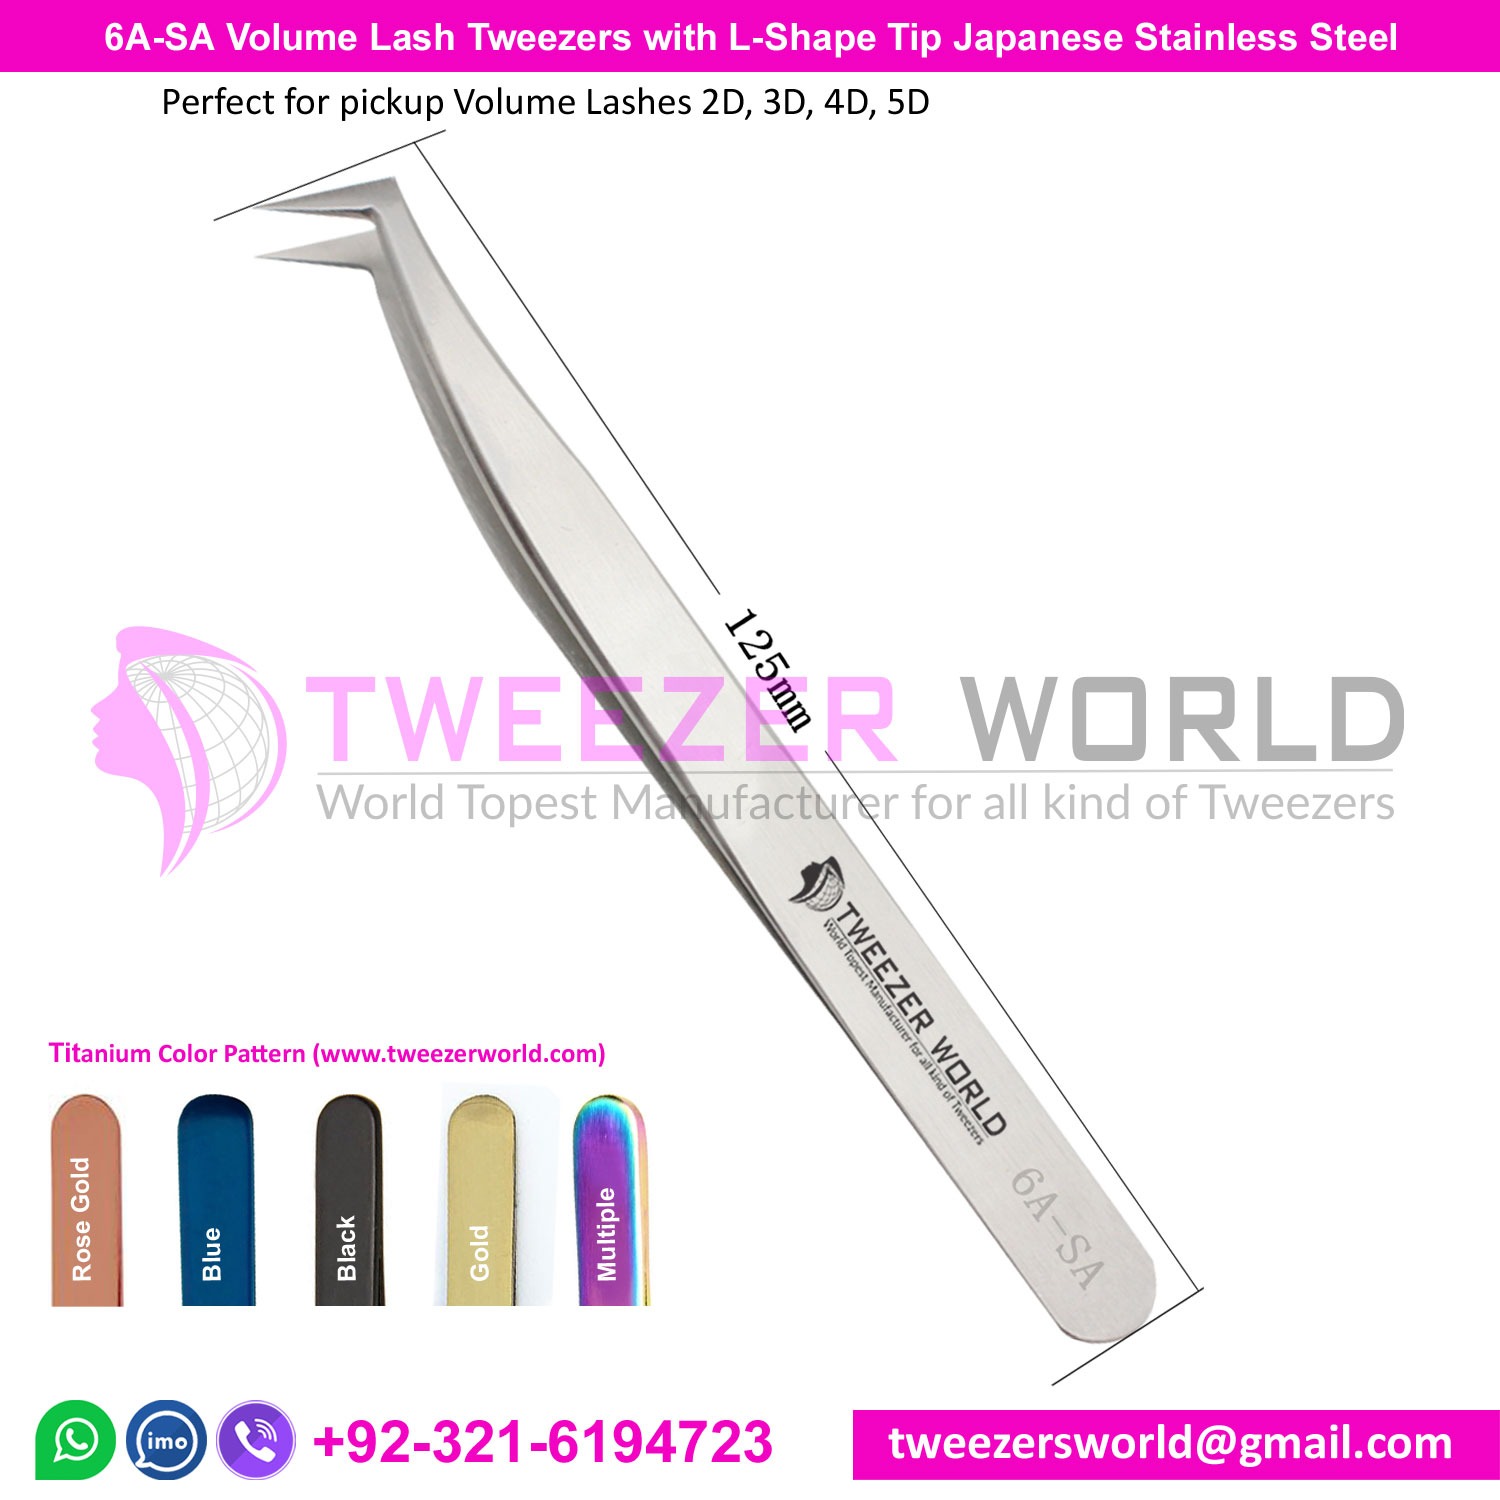 6A-SA Volume Lash Tweezers with L-Shape Tip Japanese Stainless Steel